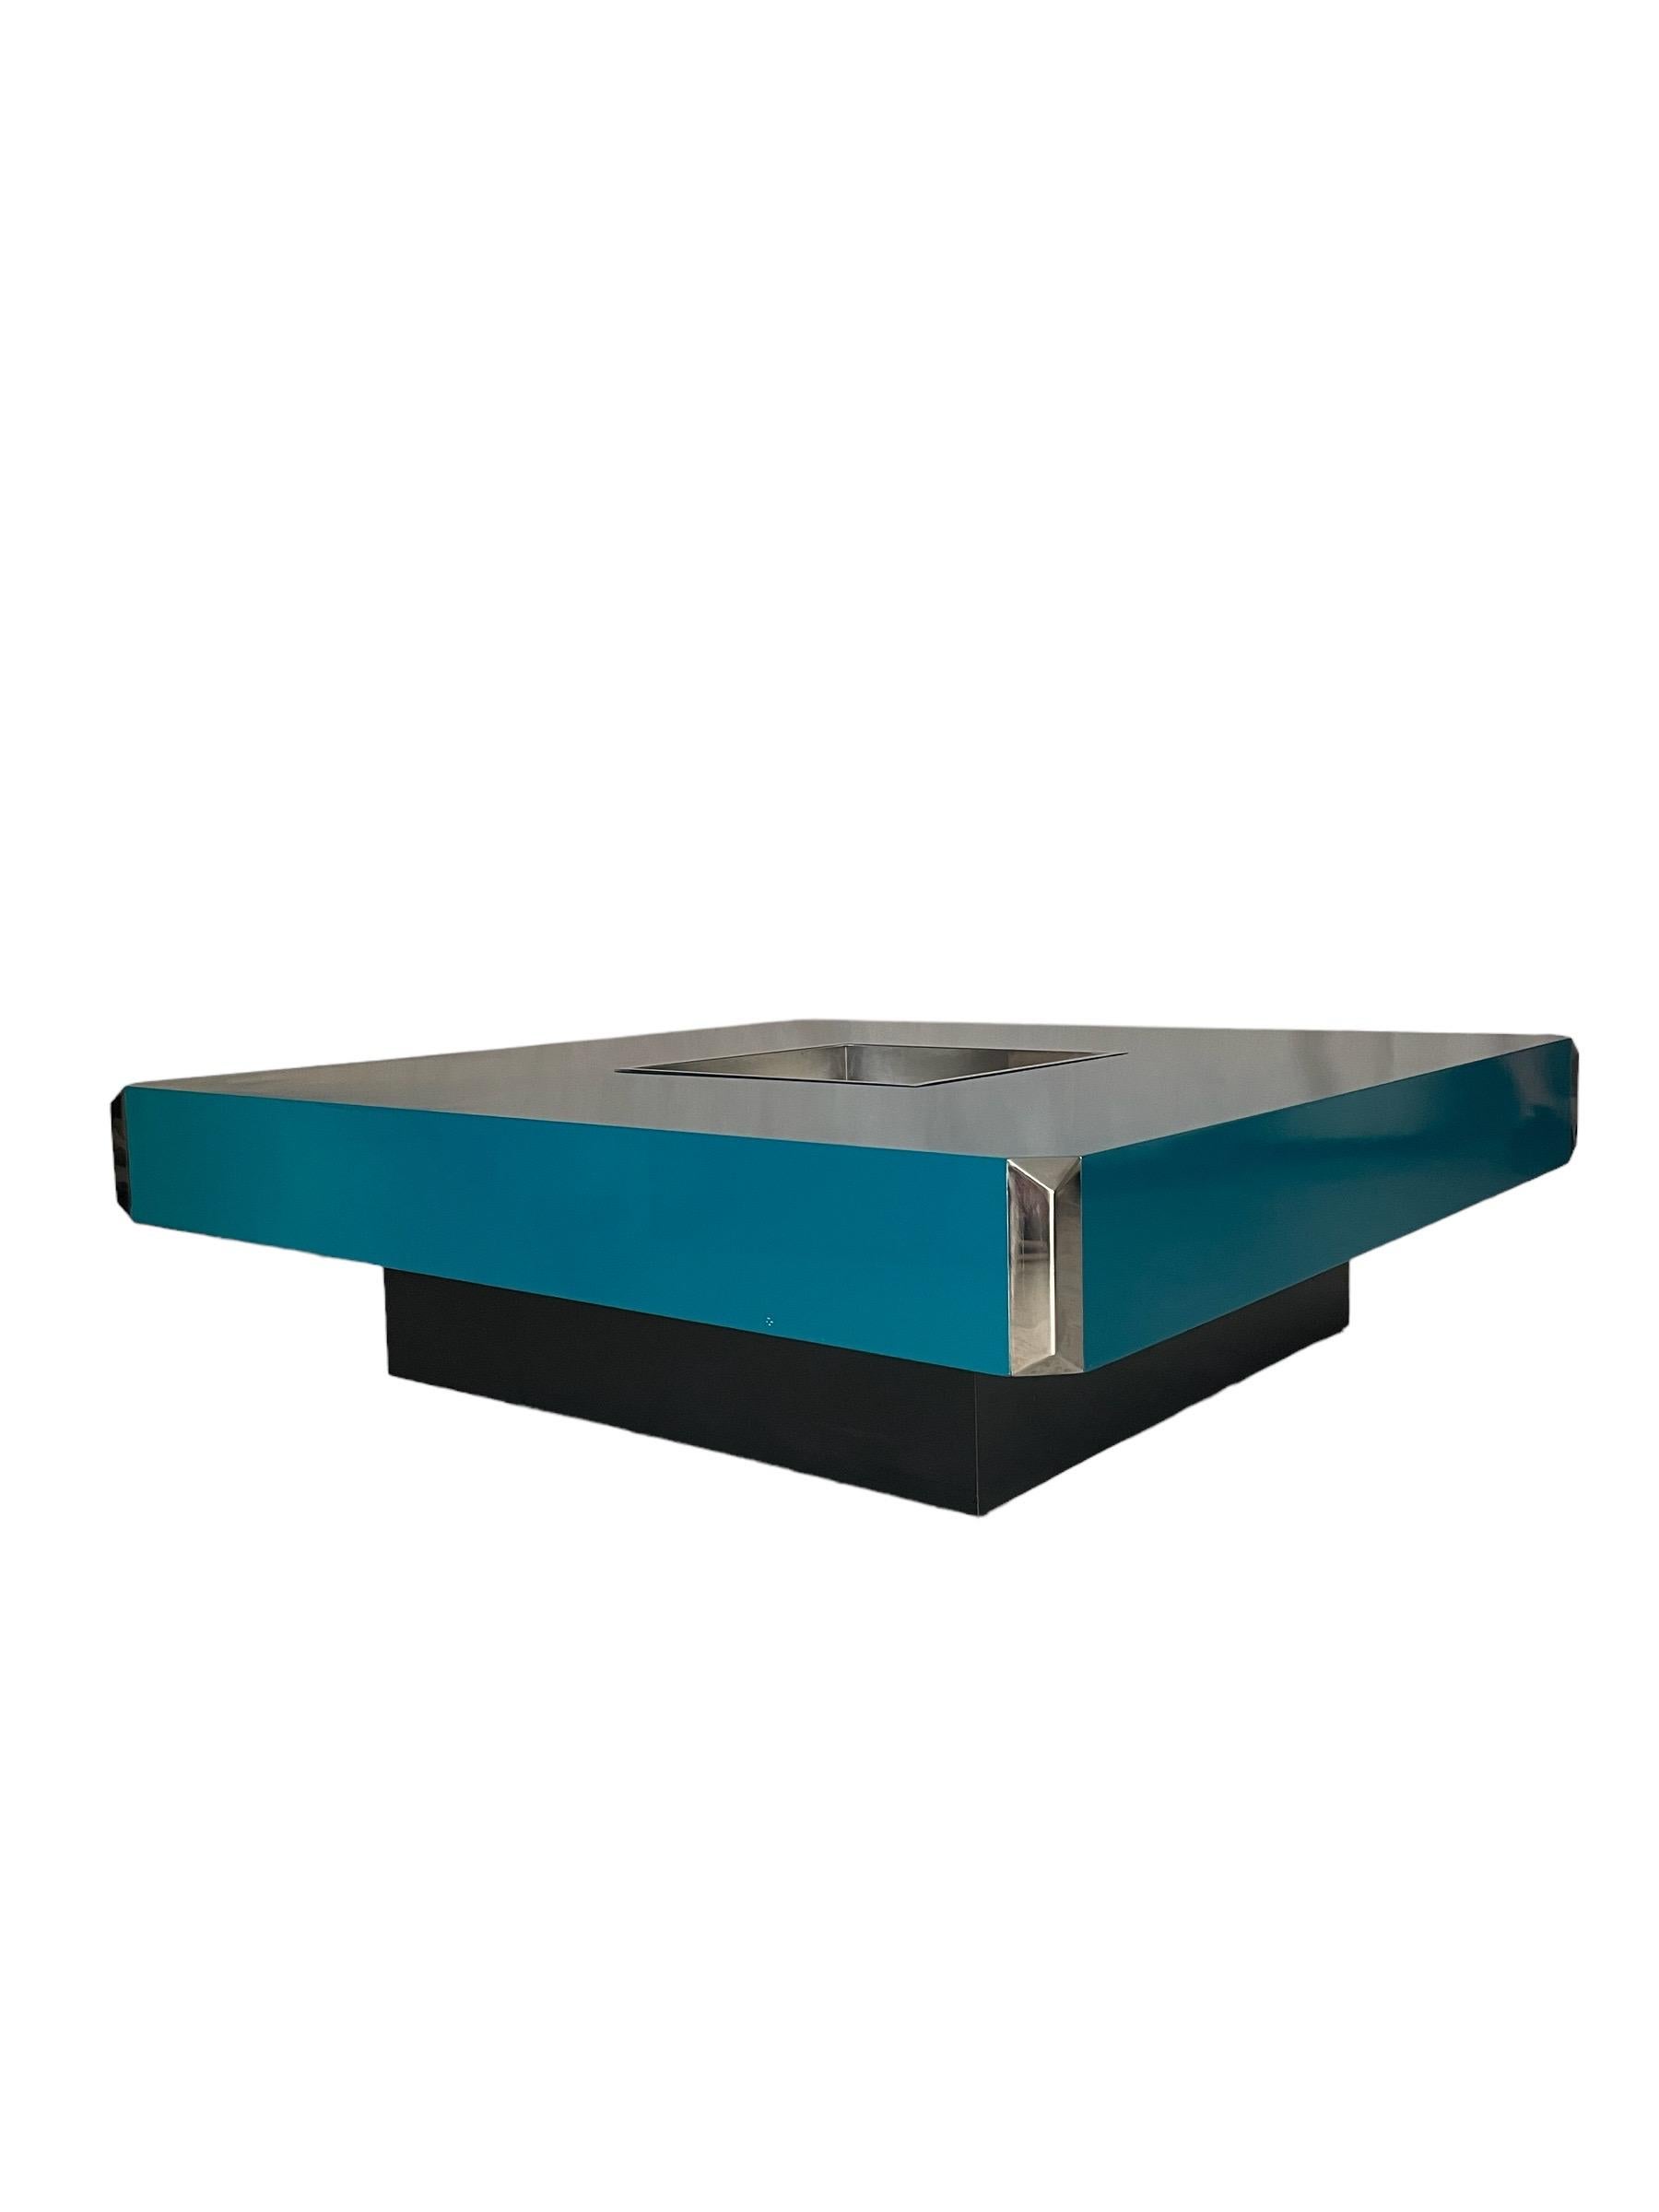 Large square Alveo Model  edited by Mario Sabot. Central steel bar and metal corners, all original. The base of black color.
Lacquered in petrol blue. France 70s.